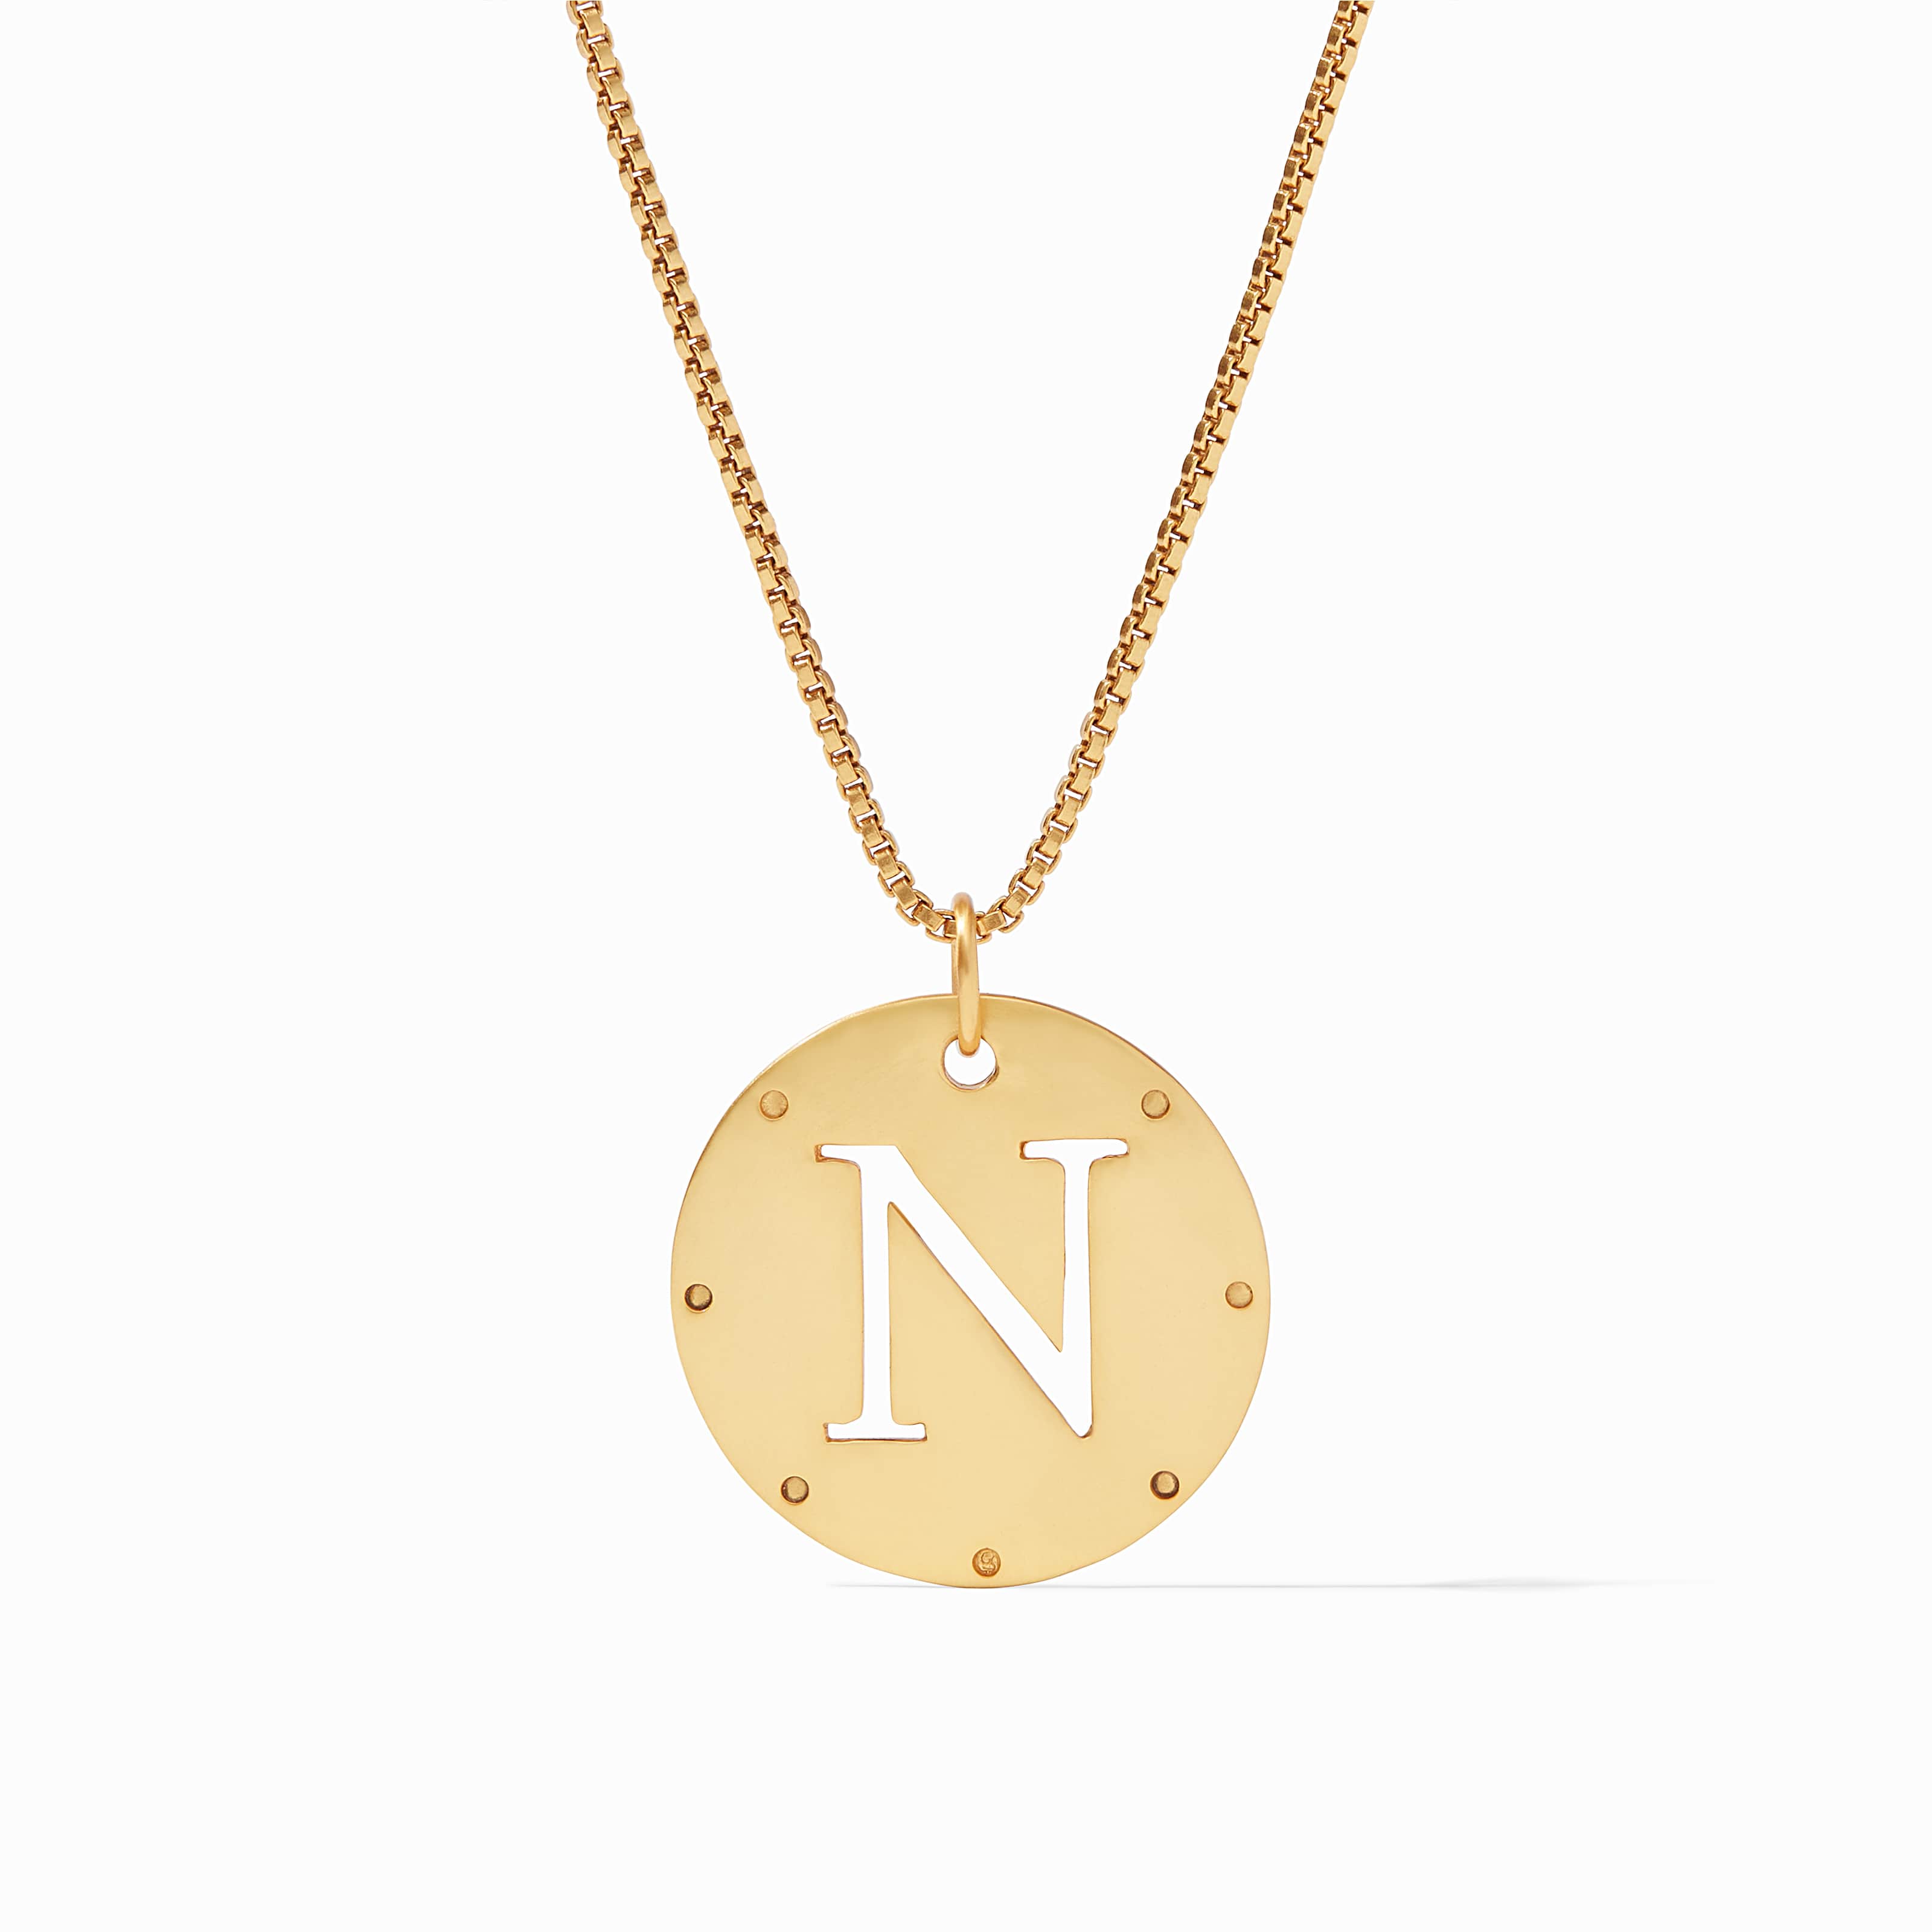 Dainty Gold Plated Initial Necklace – JOY by Corrine Smith